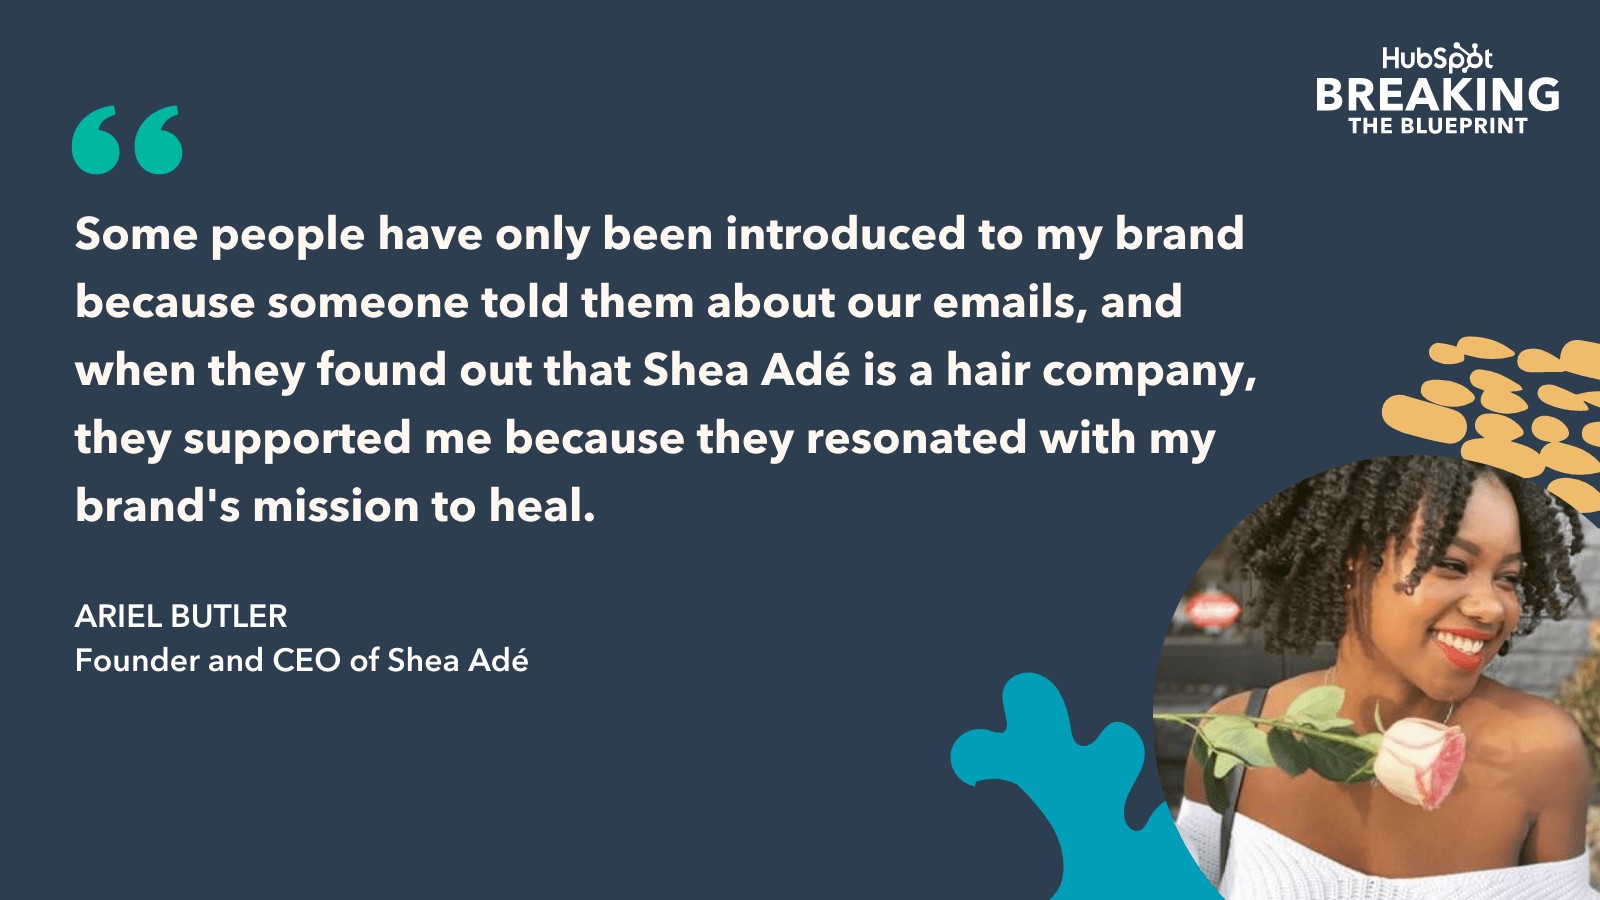 Email marketing strategy from Ariel Butler CEO of Shea Ade